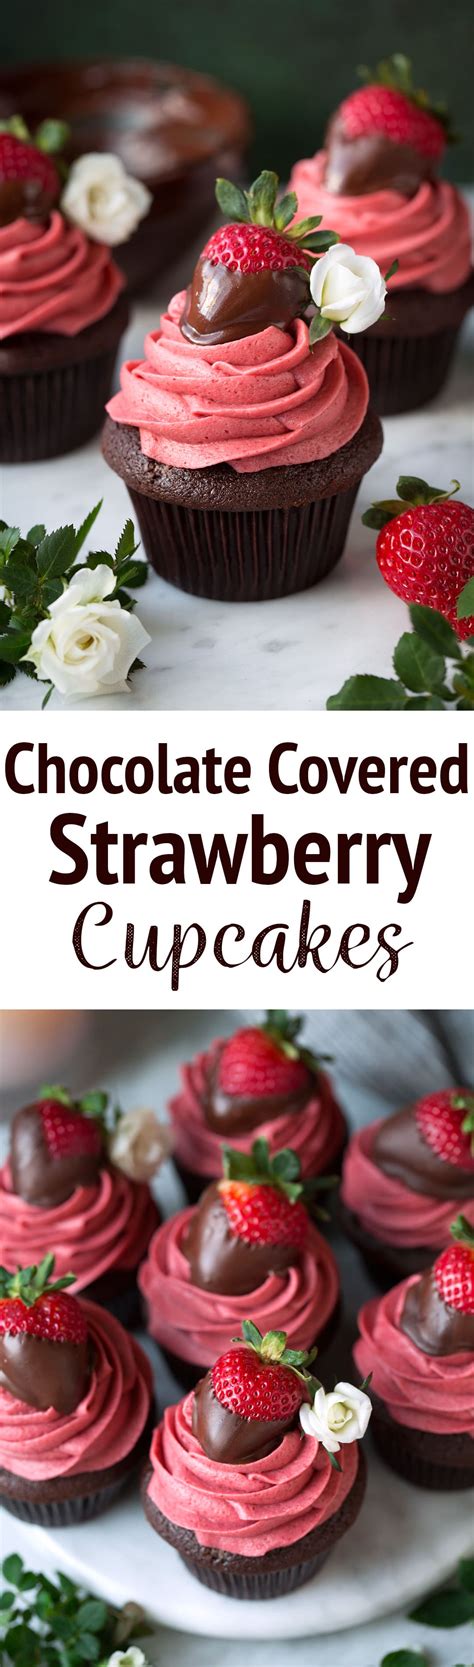 Chocolate Cupcakes With Strawberry Frosting Cooking Classy